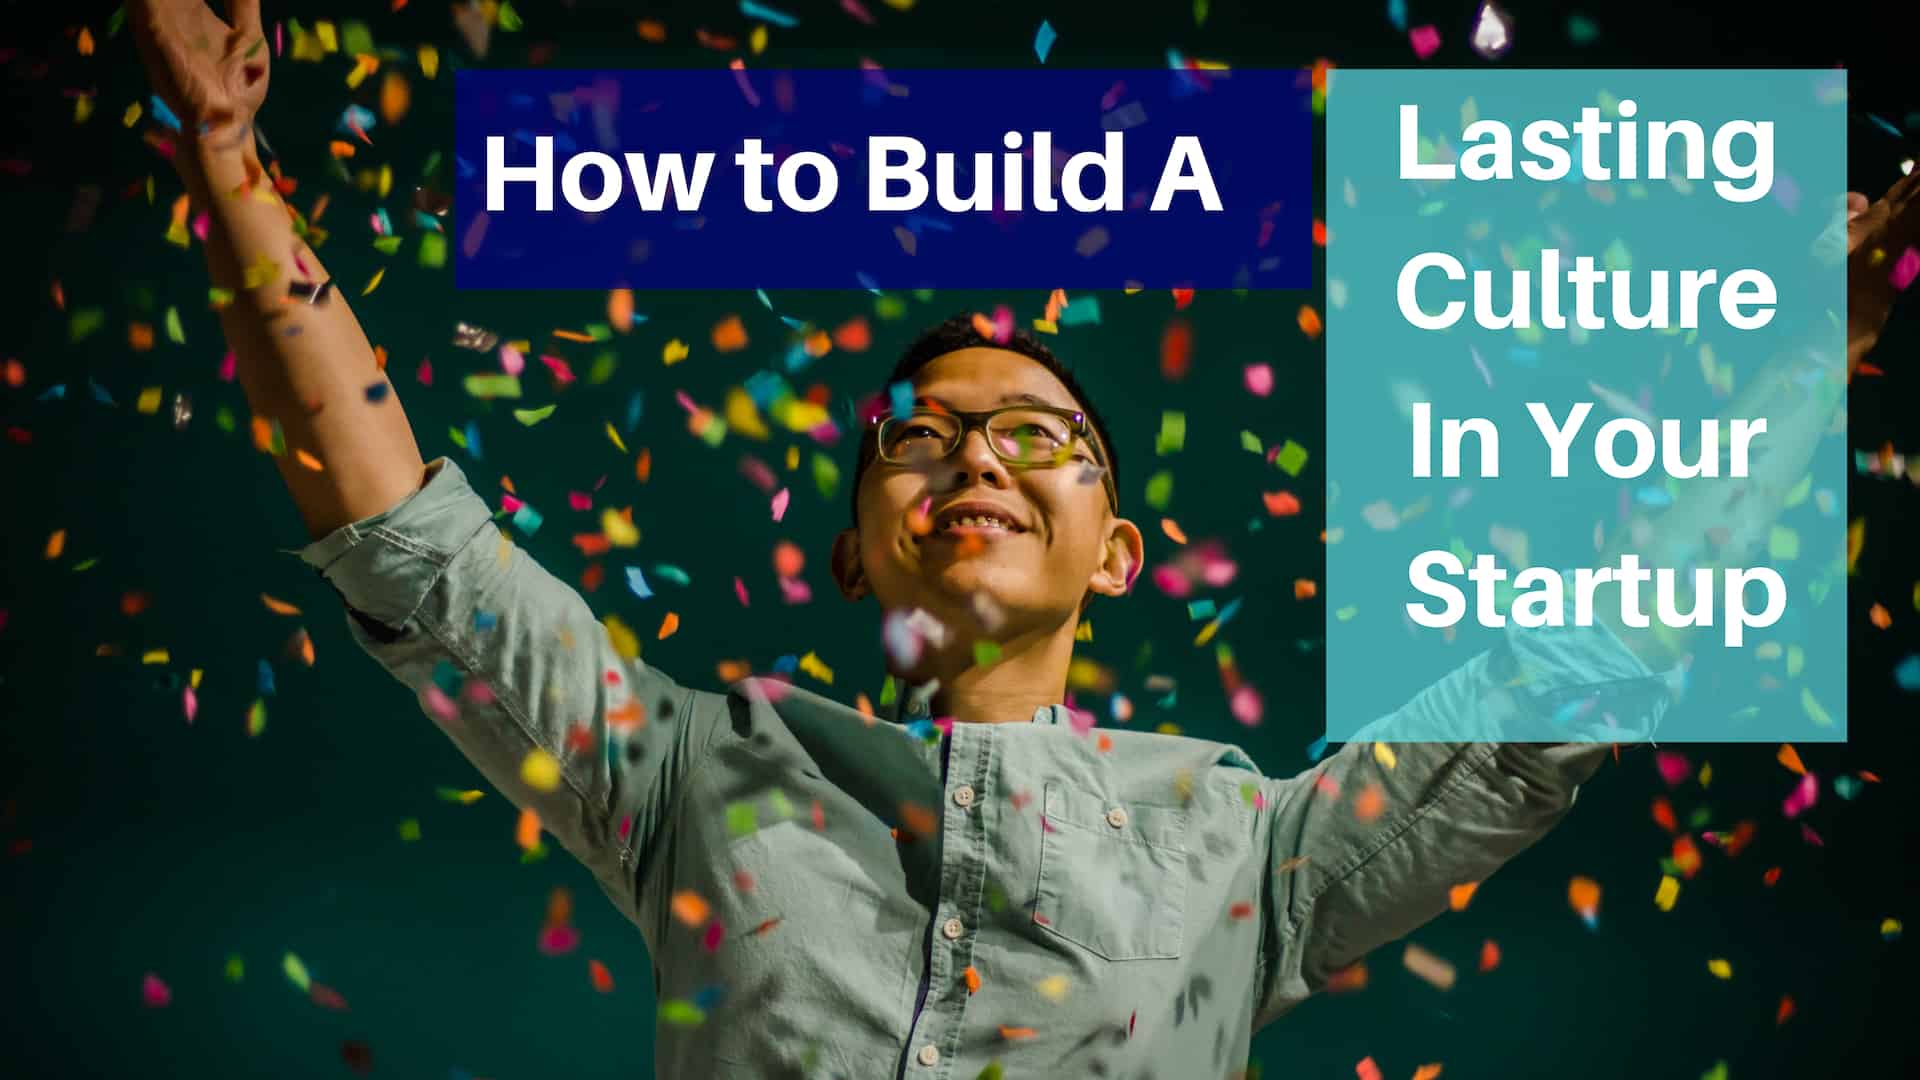 How To Build A Lasting Culture In Your Startup